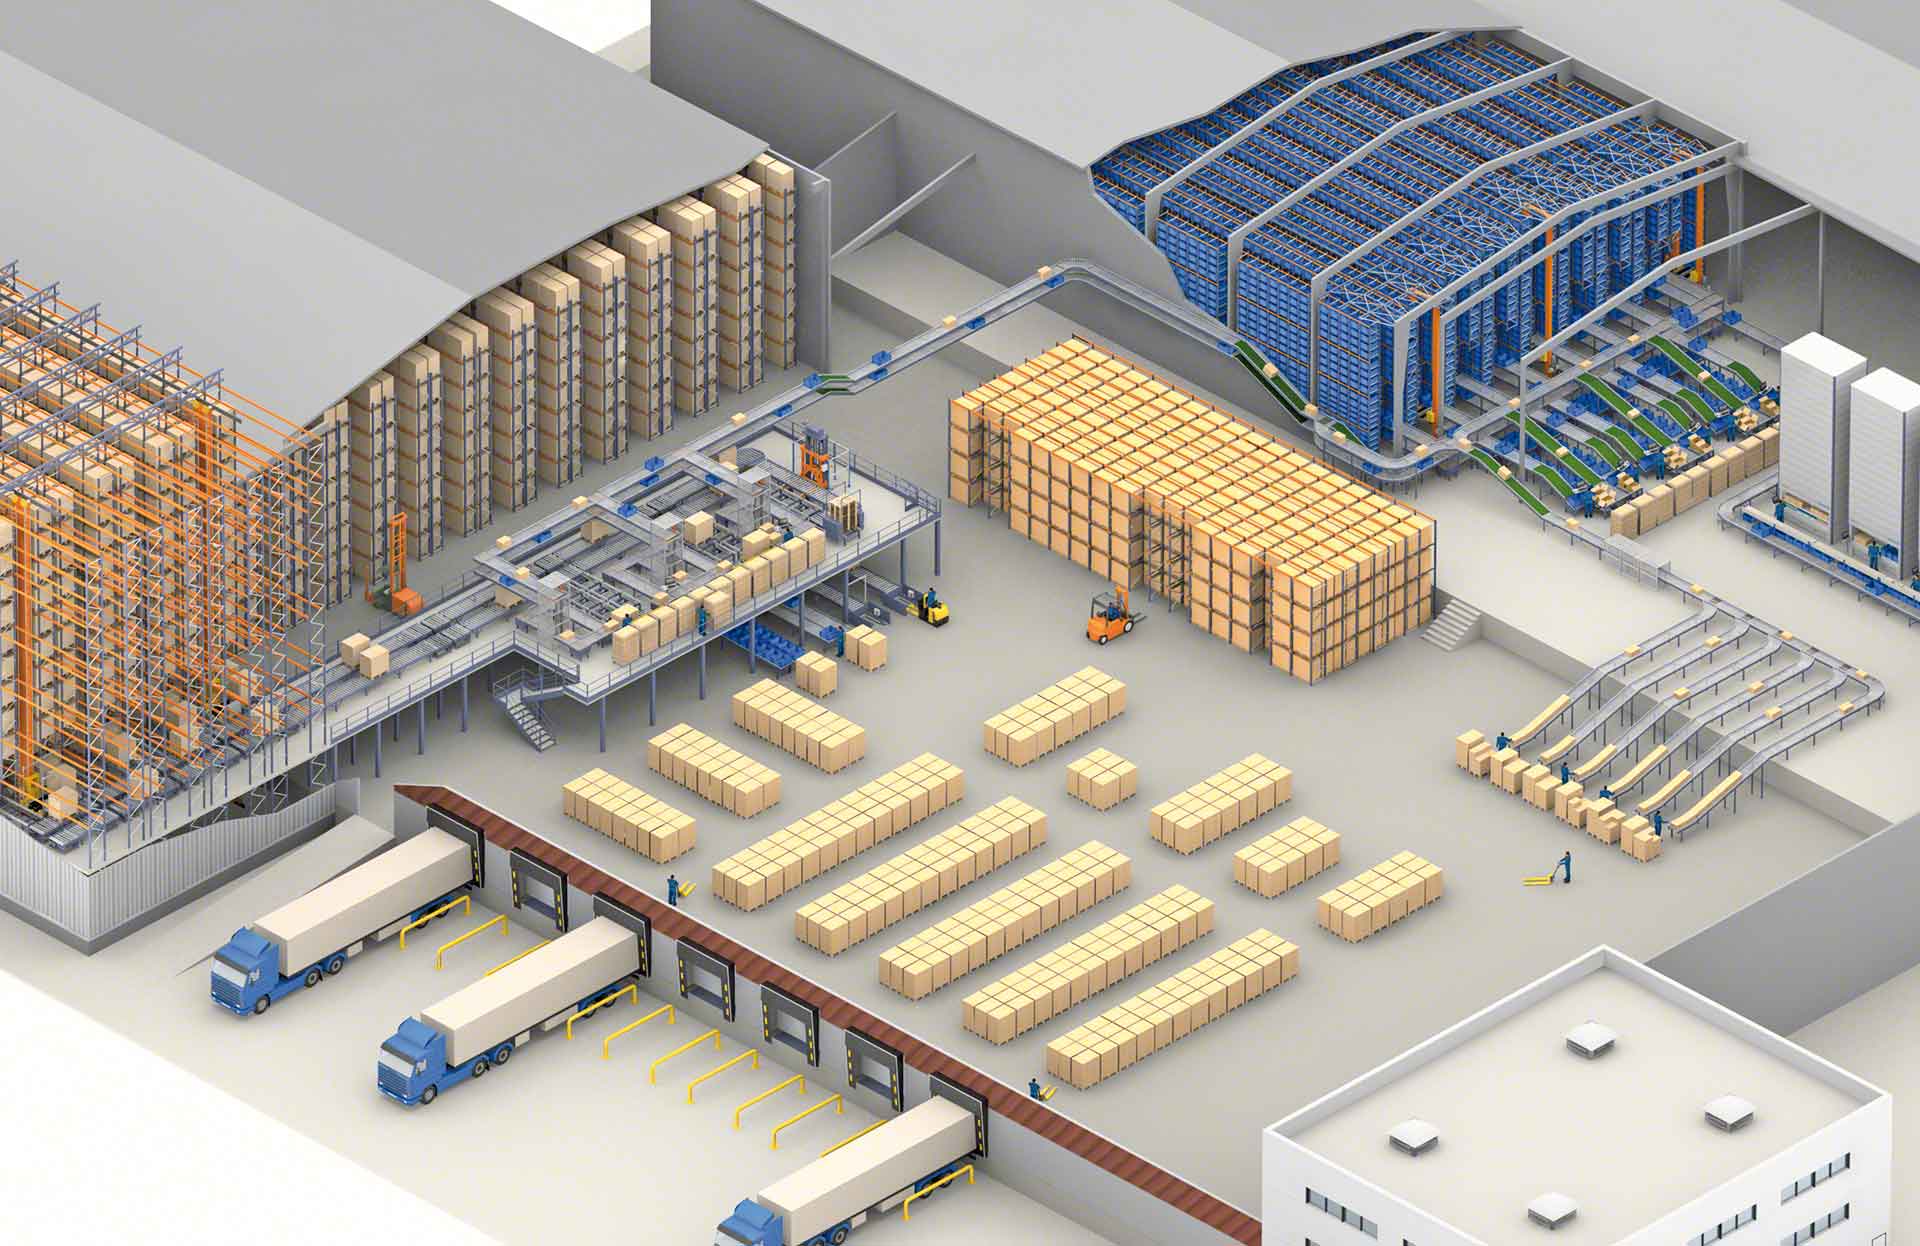 WhTech-WMS as a top-notch solution for warehouse processes